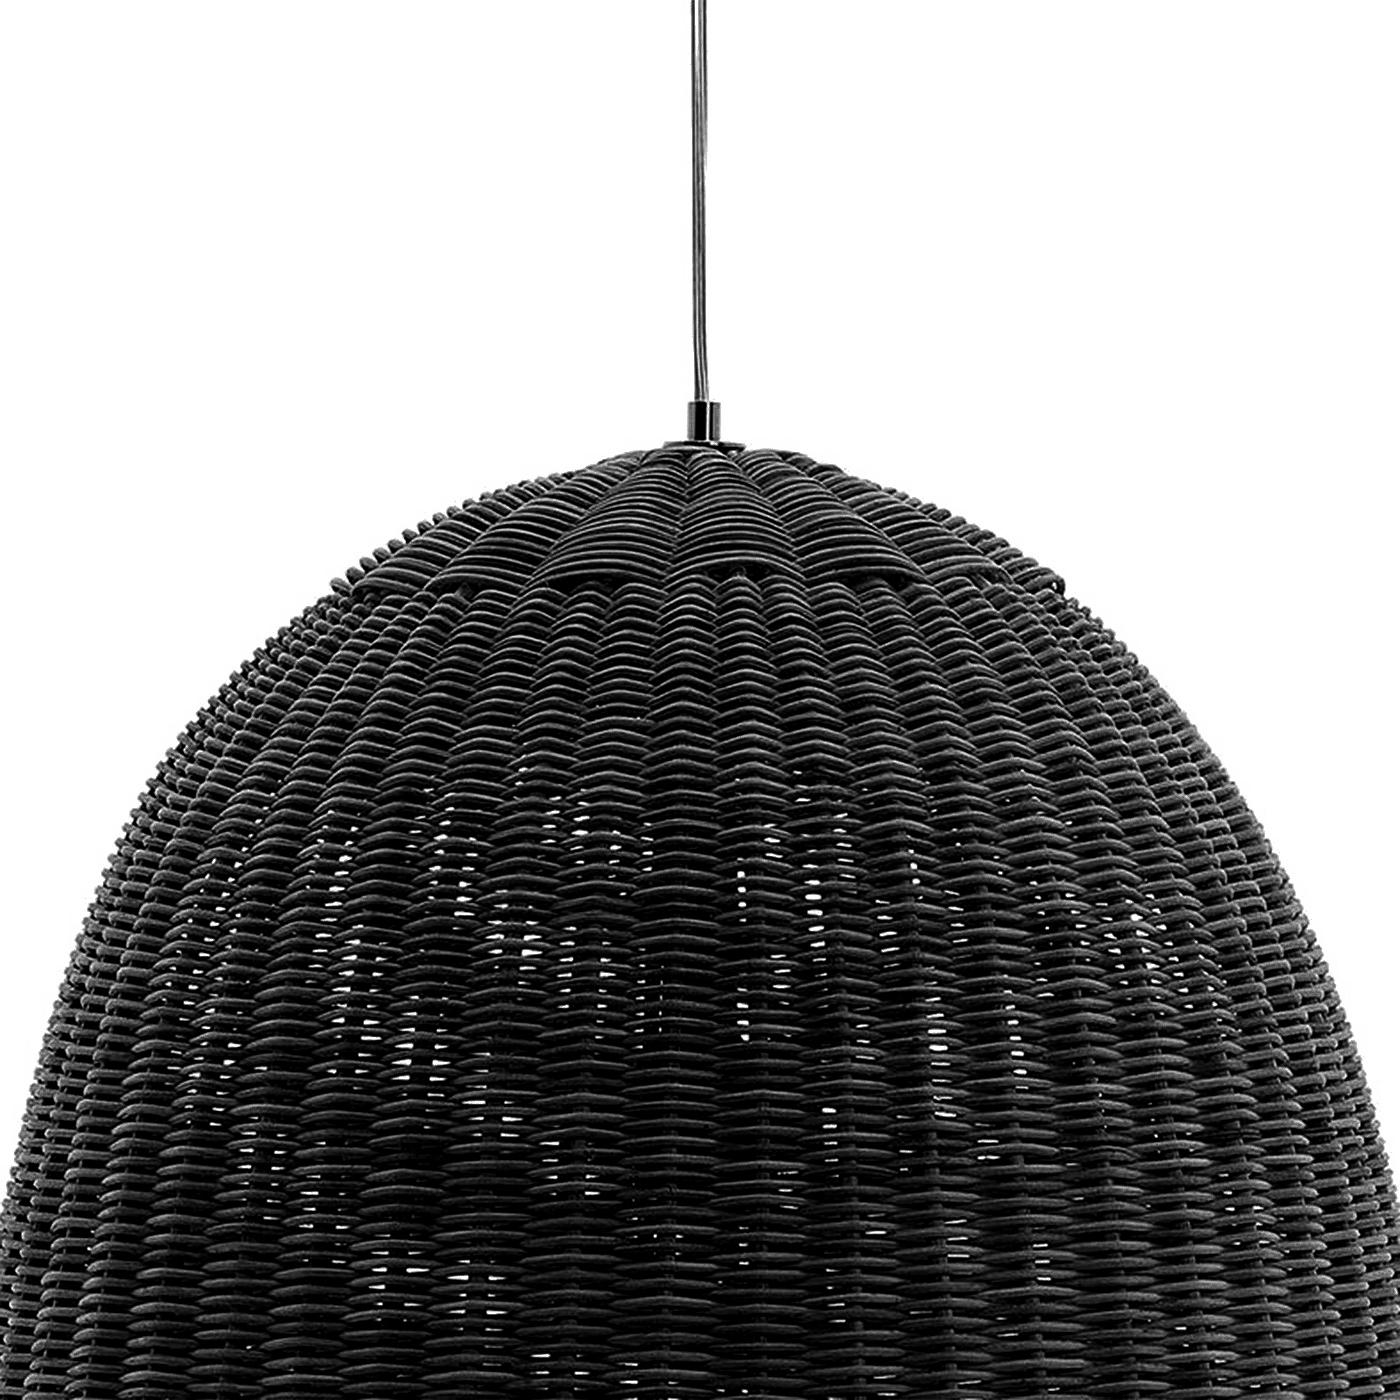 Suspension Esther Black all in handwoven rattan core,
in black finish. 1 bulb, lamp holder type E27, max. 20 Watts, 
220 Volt, bulb not included. With electrical cable 200 cm 
and with steel cable 200 cm.